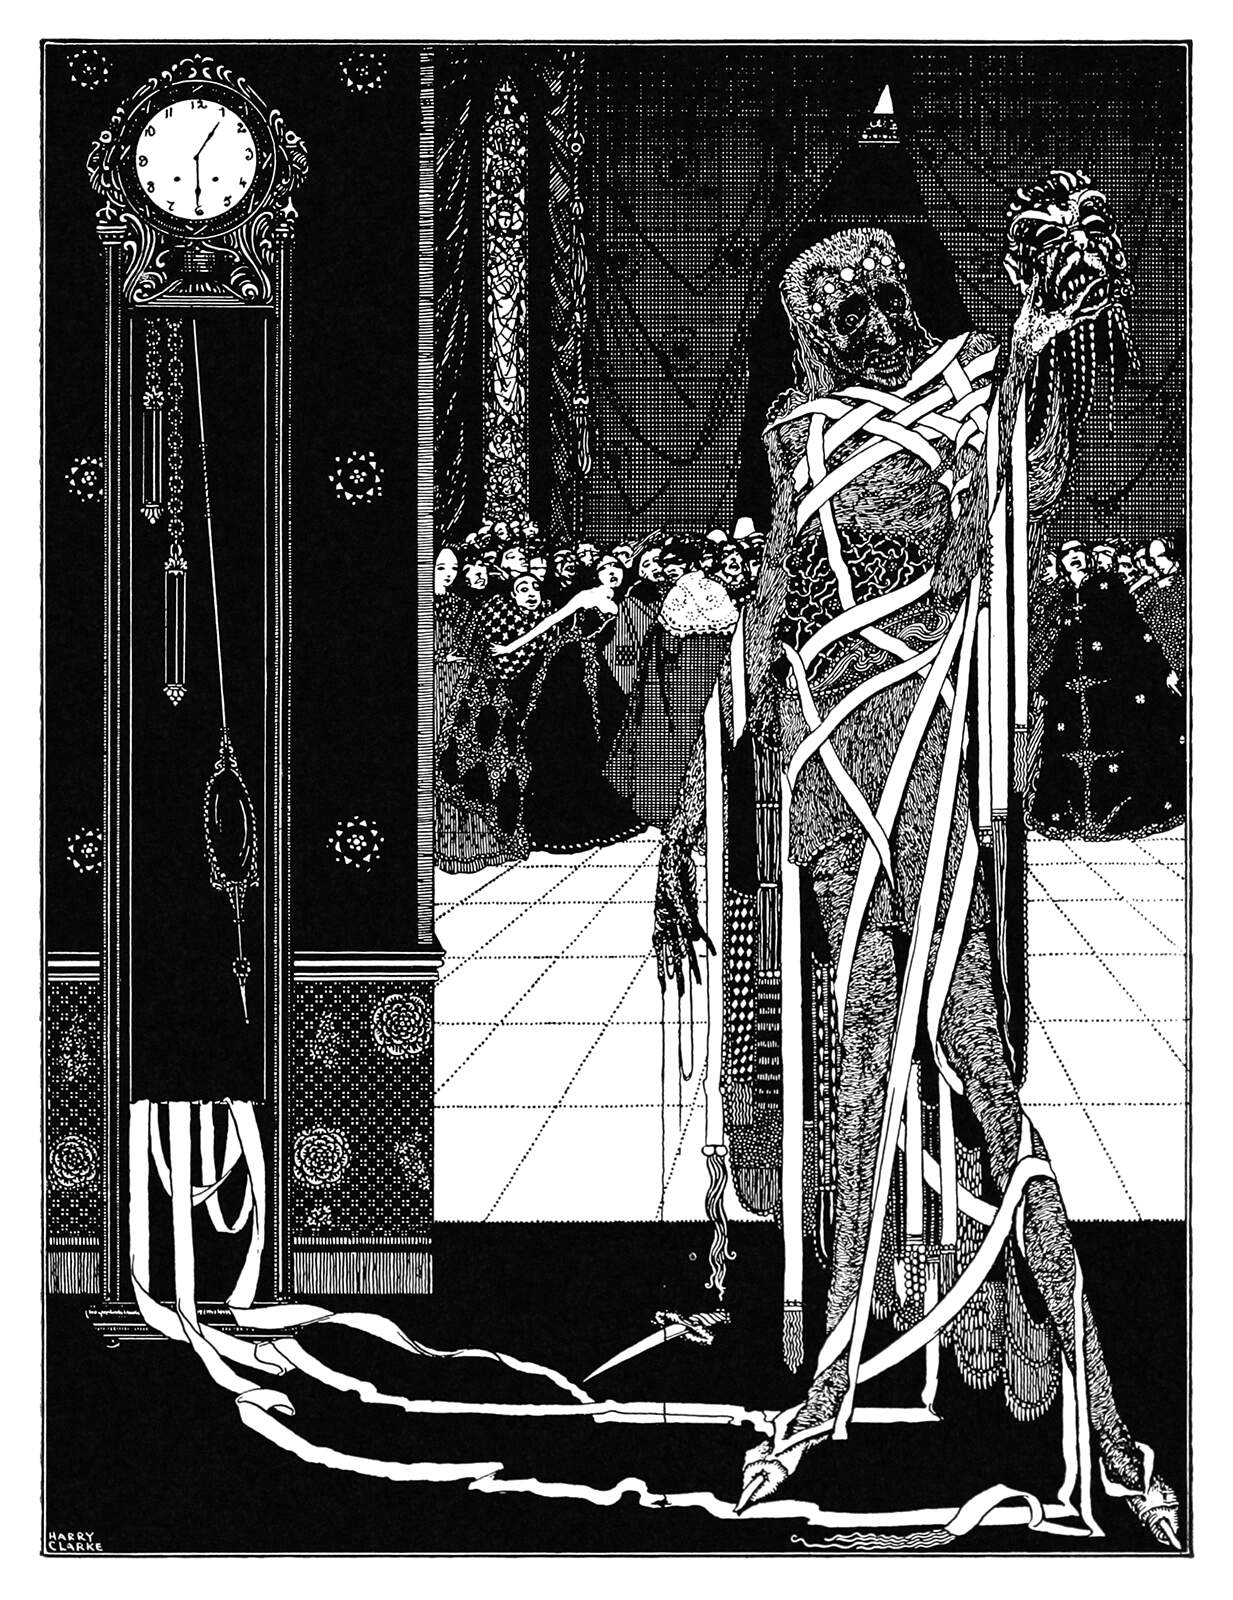 Harry Clarke, The Dagger Dropped from Edgar Allan Poe, Tales of Mystery and Imagination, George G. Harrap and Co., London, 1919. Public Domain Review.